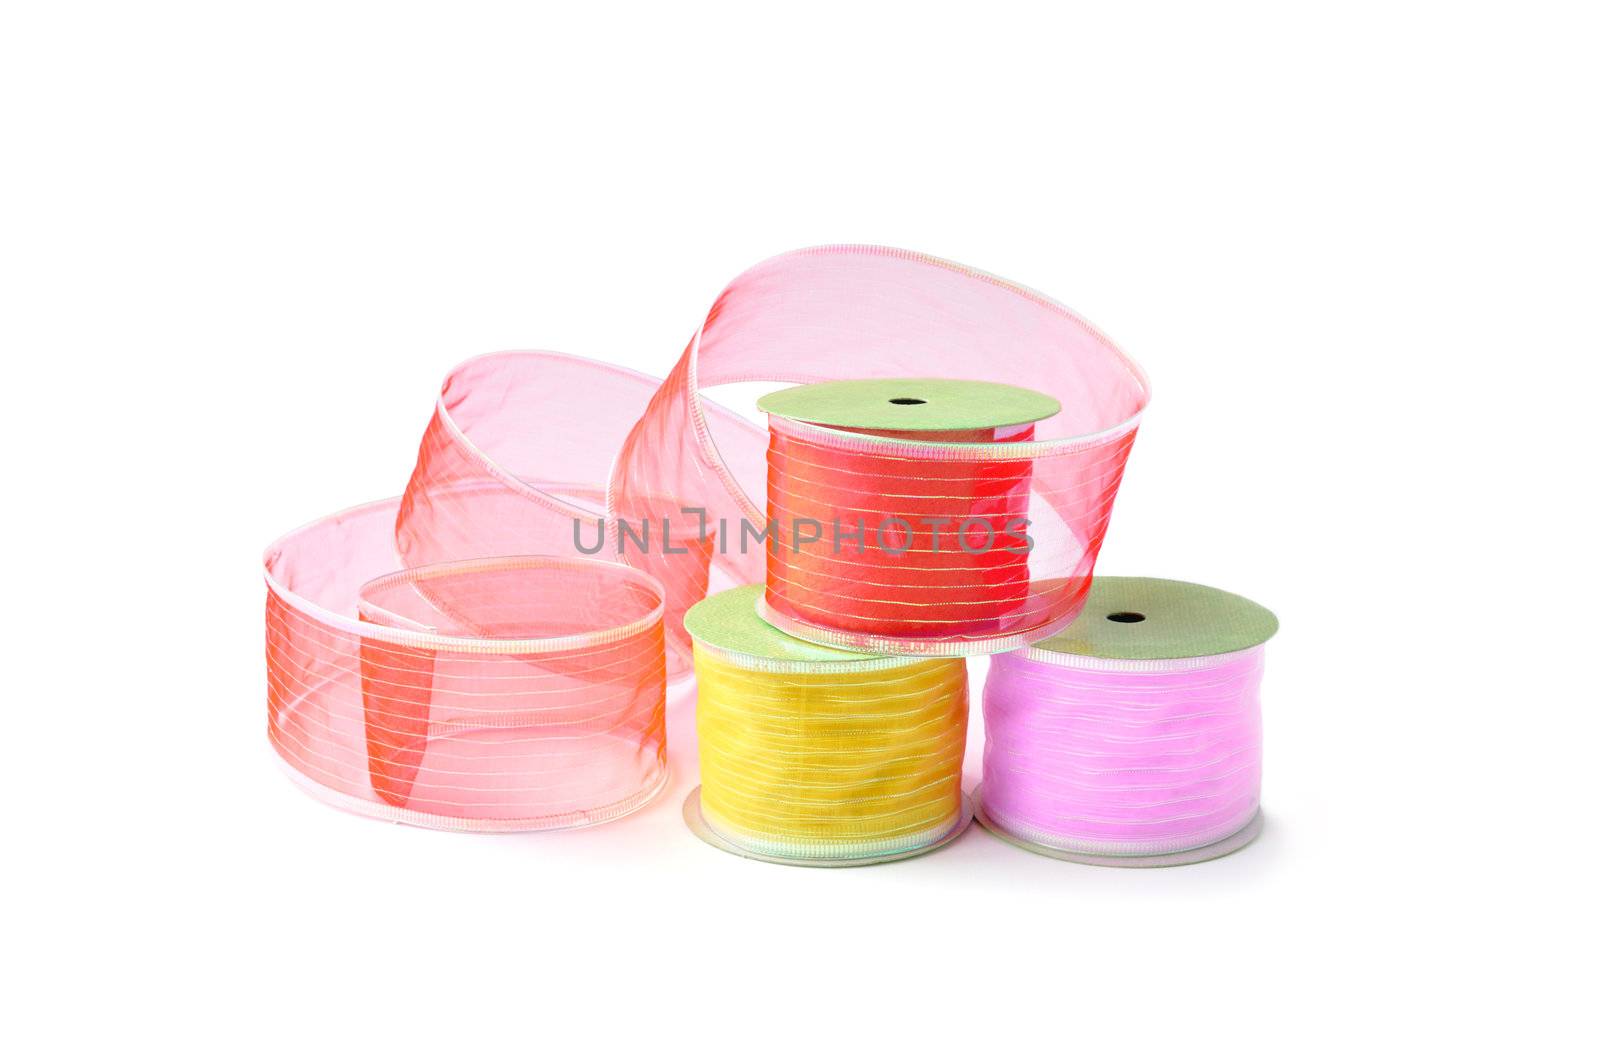 Ribbon, fringe, ribbons, gift packaging, the subject roll, the isolated, decor, crafts, ribbon, variety, color, transparent,